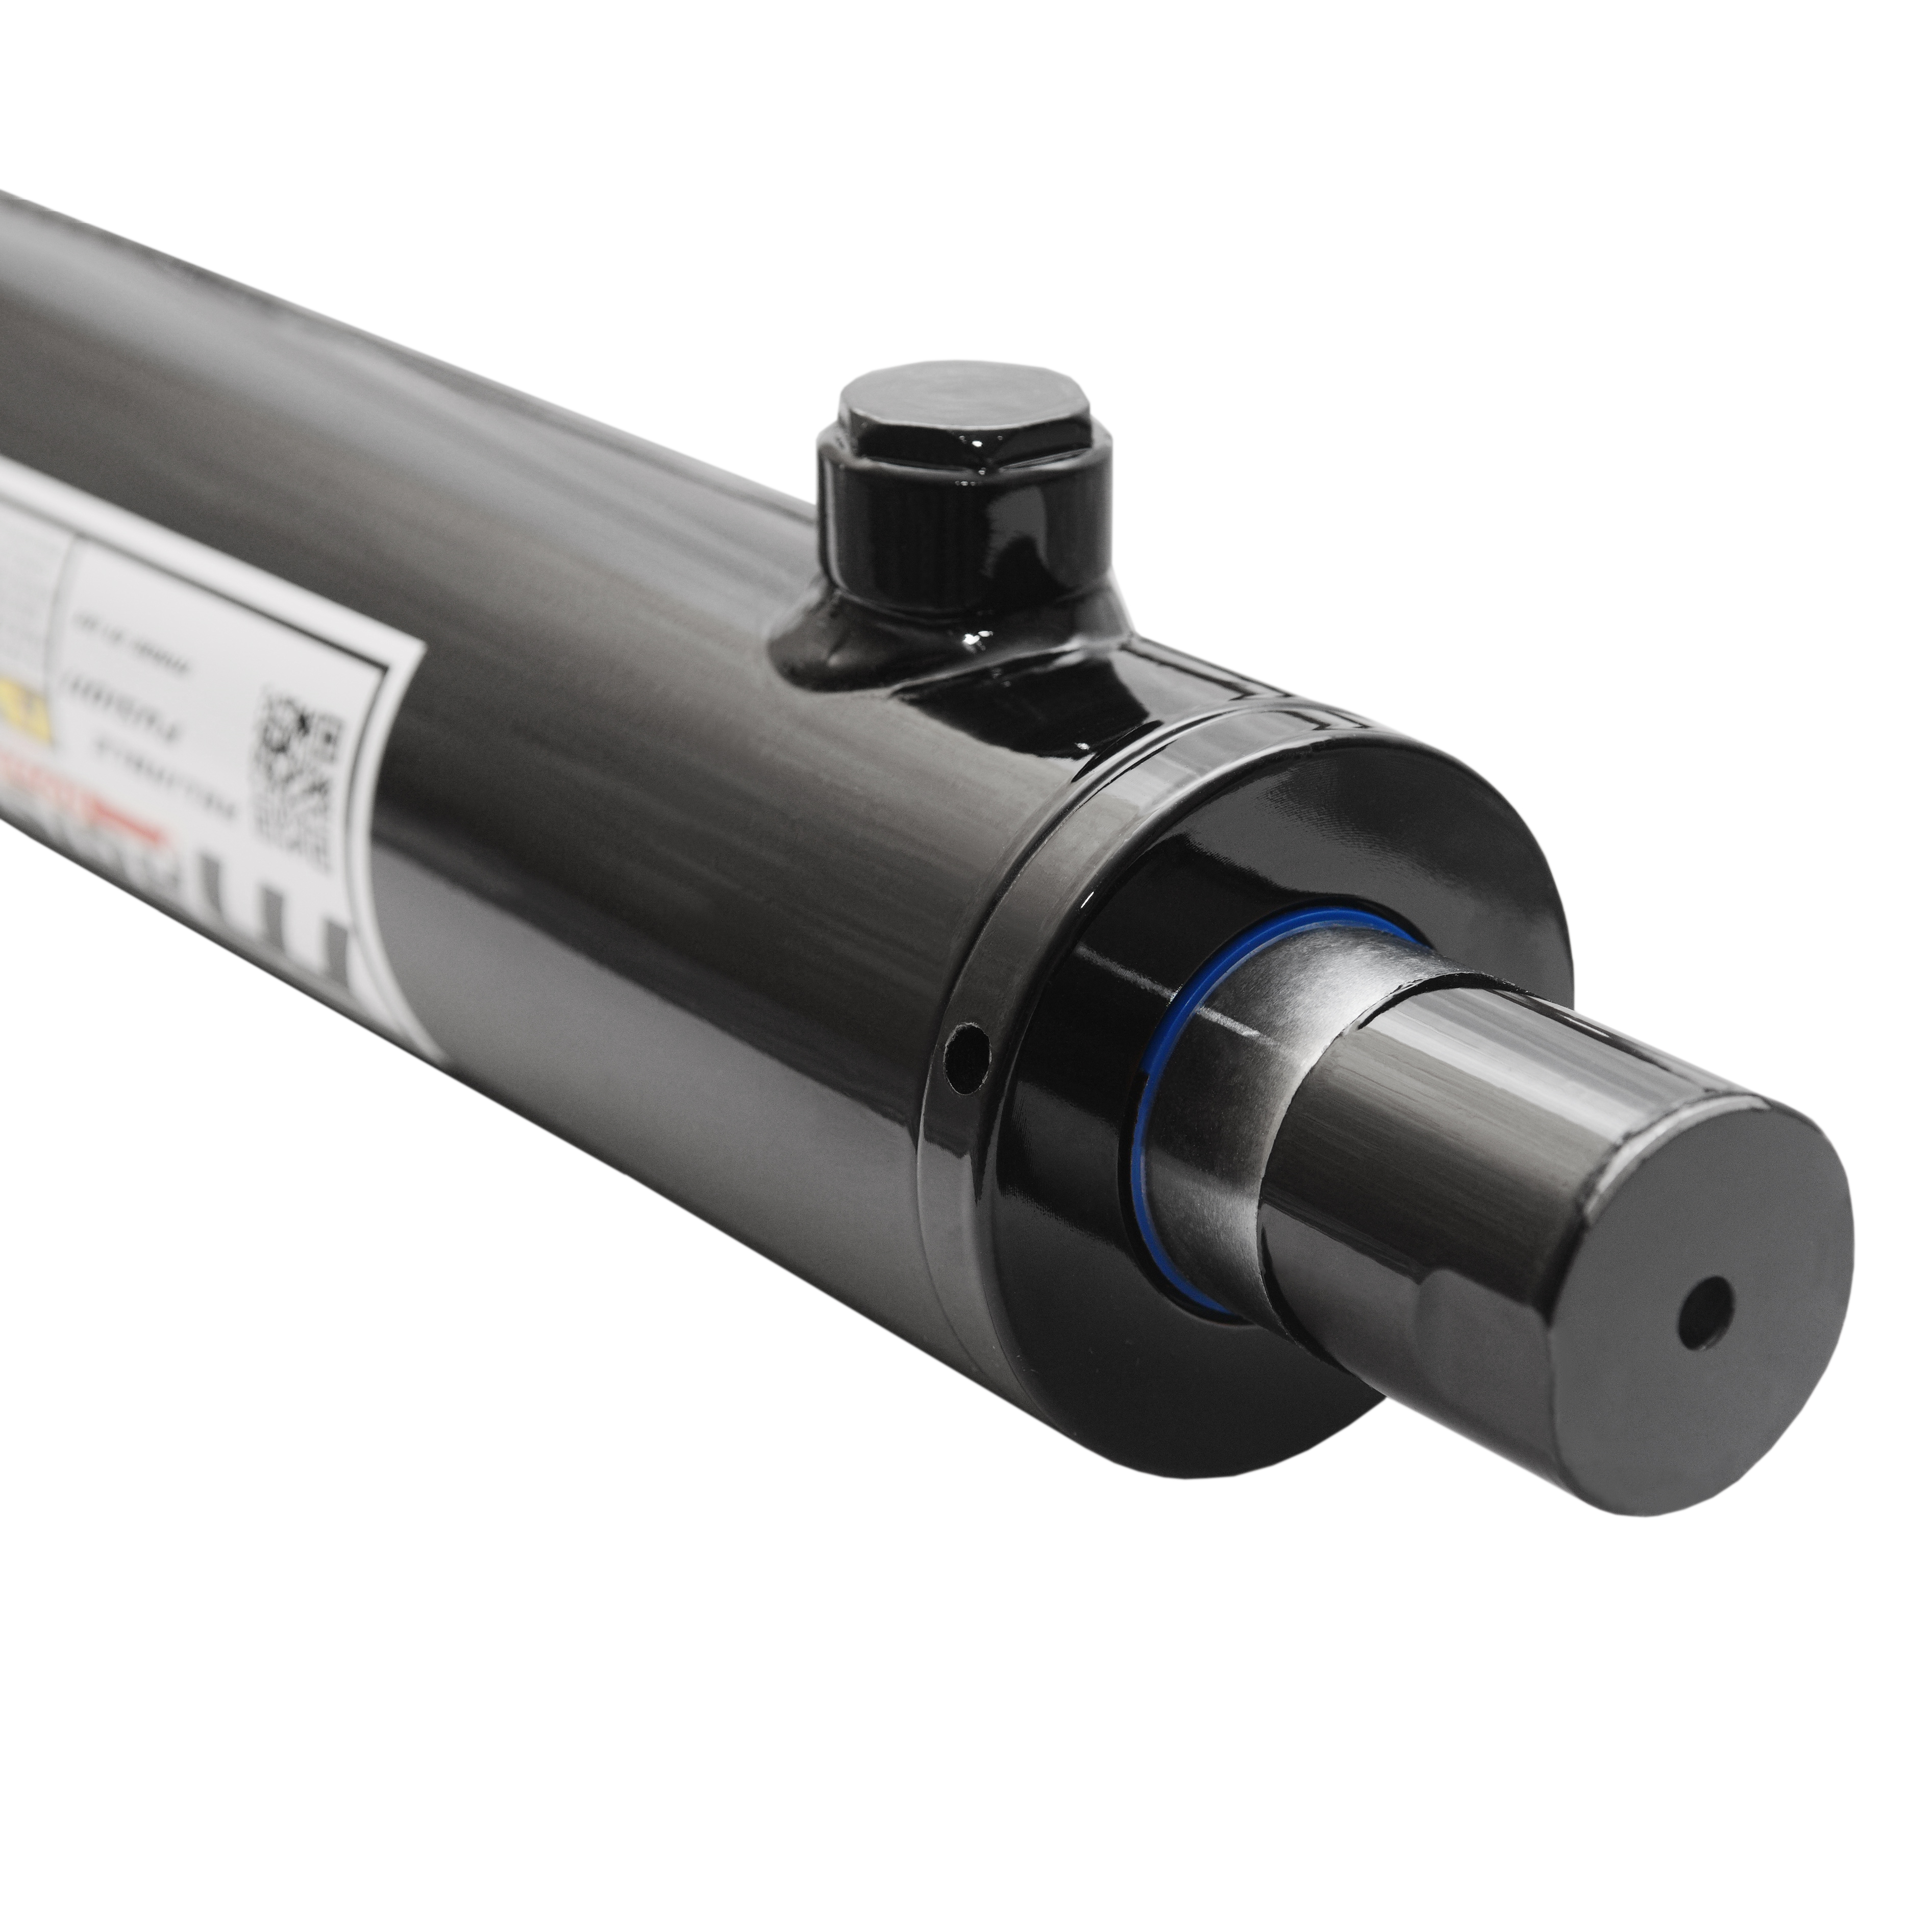 2 bore x 13 stroke hydraulic cylinder, welded universal double acting cylinder | Magister Hydraulics